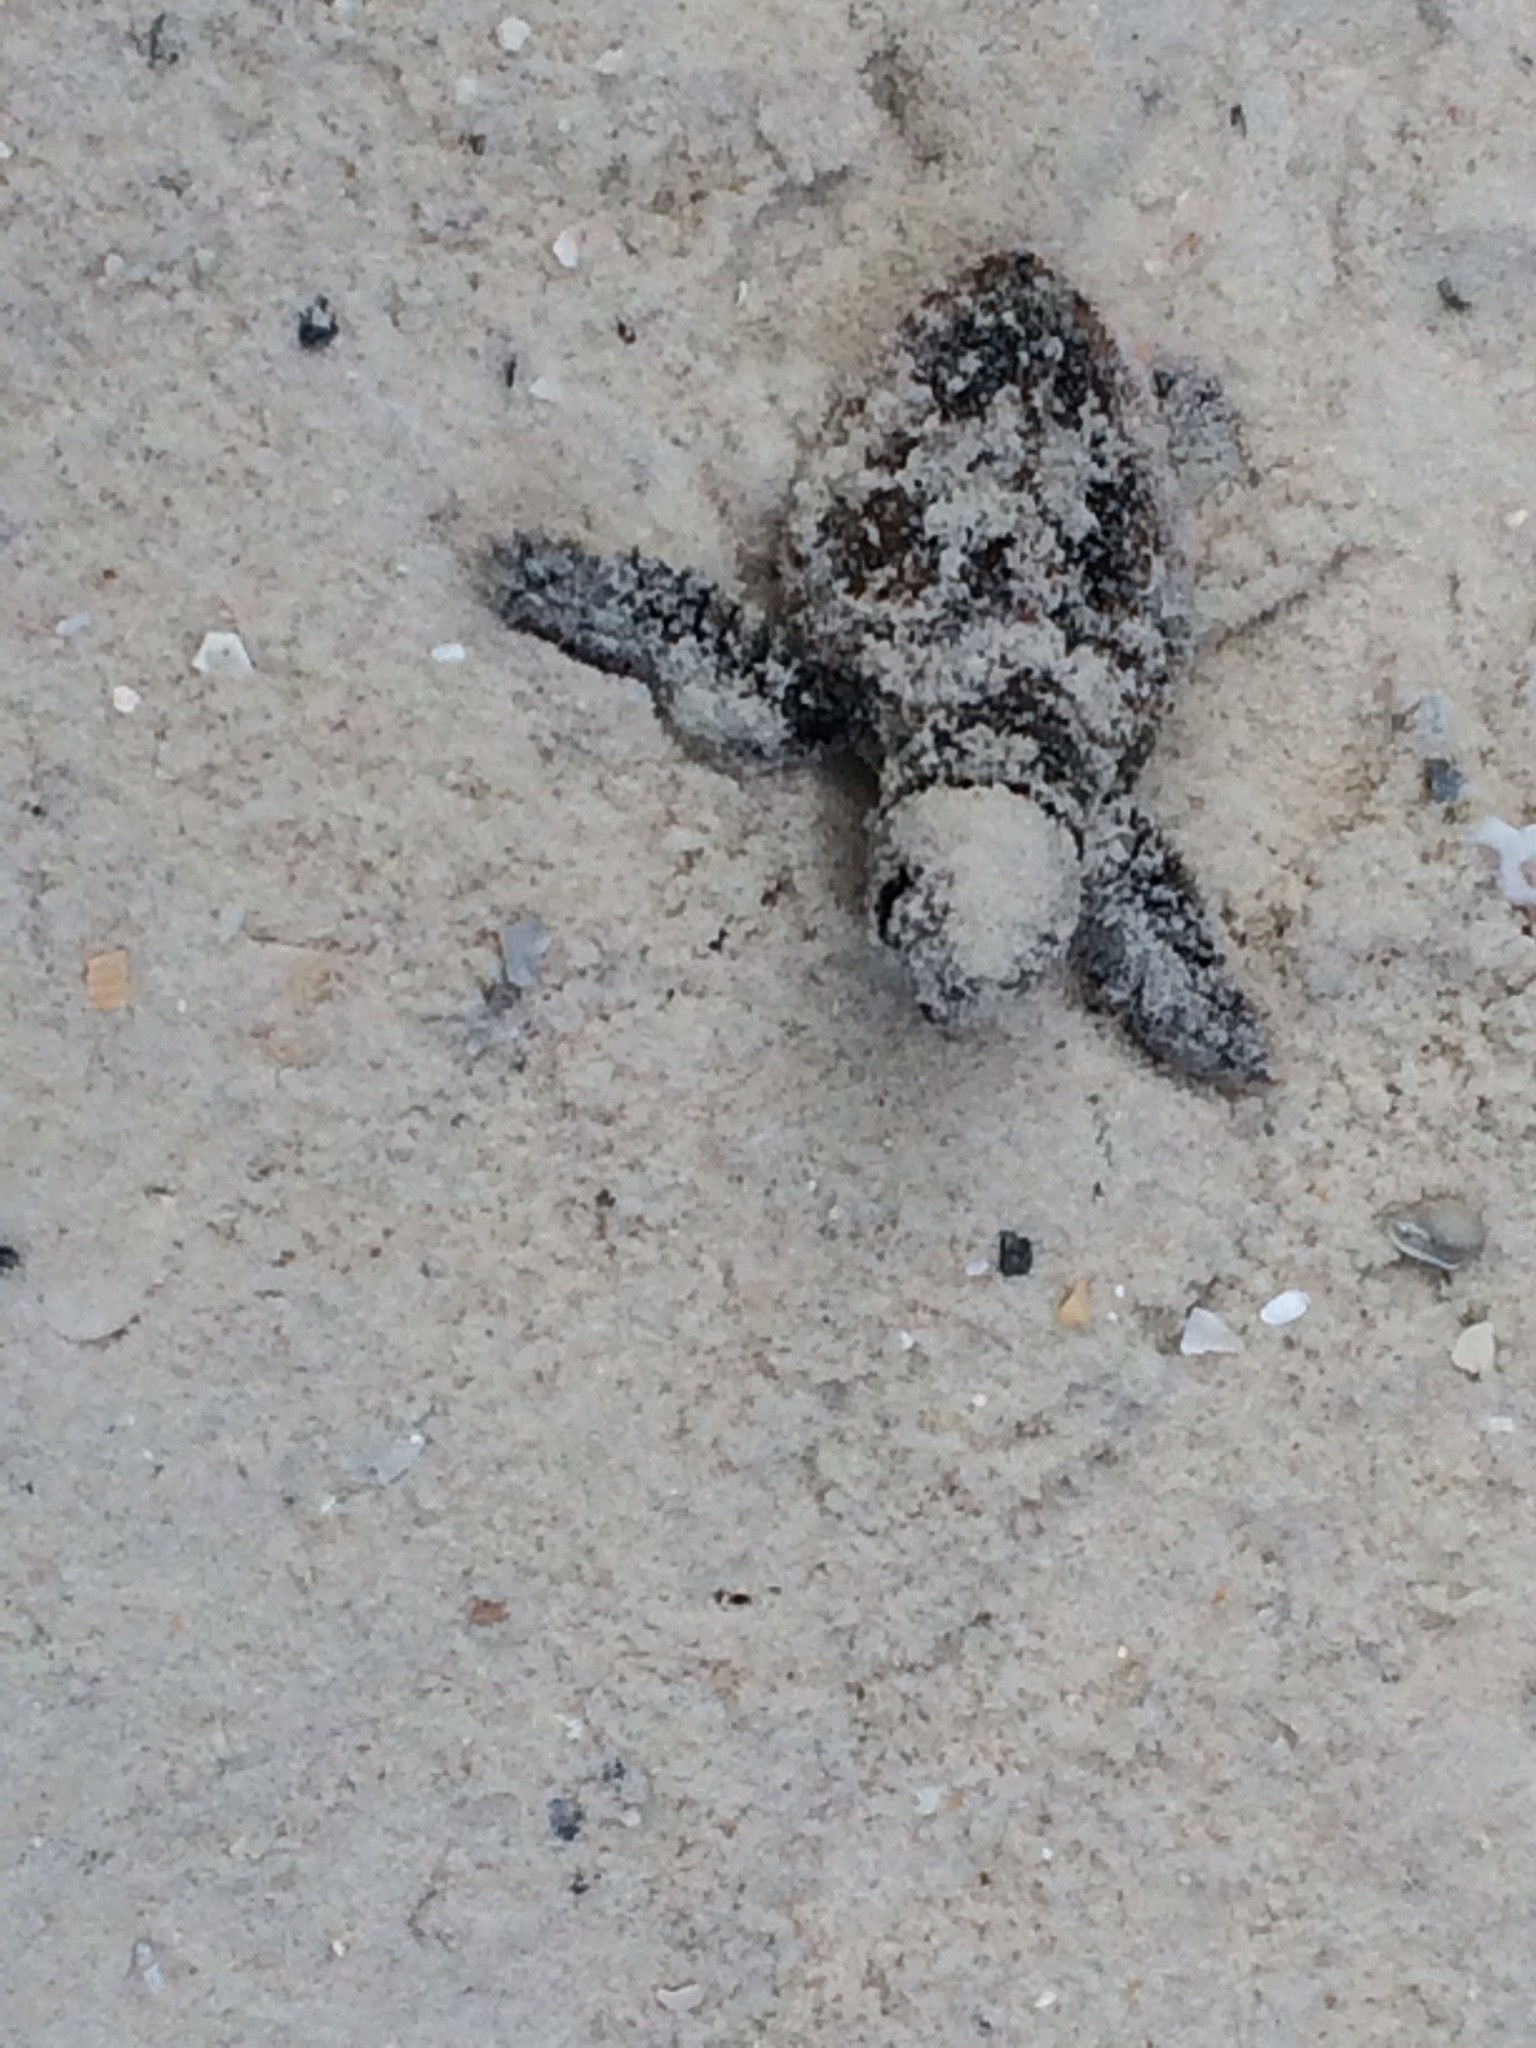 Sand covered sea turtle hatchling.